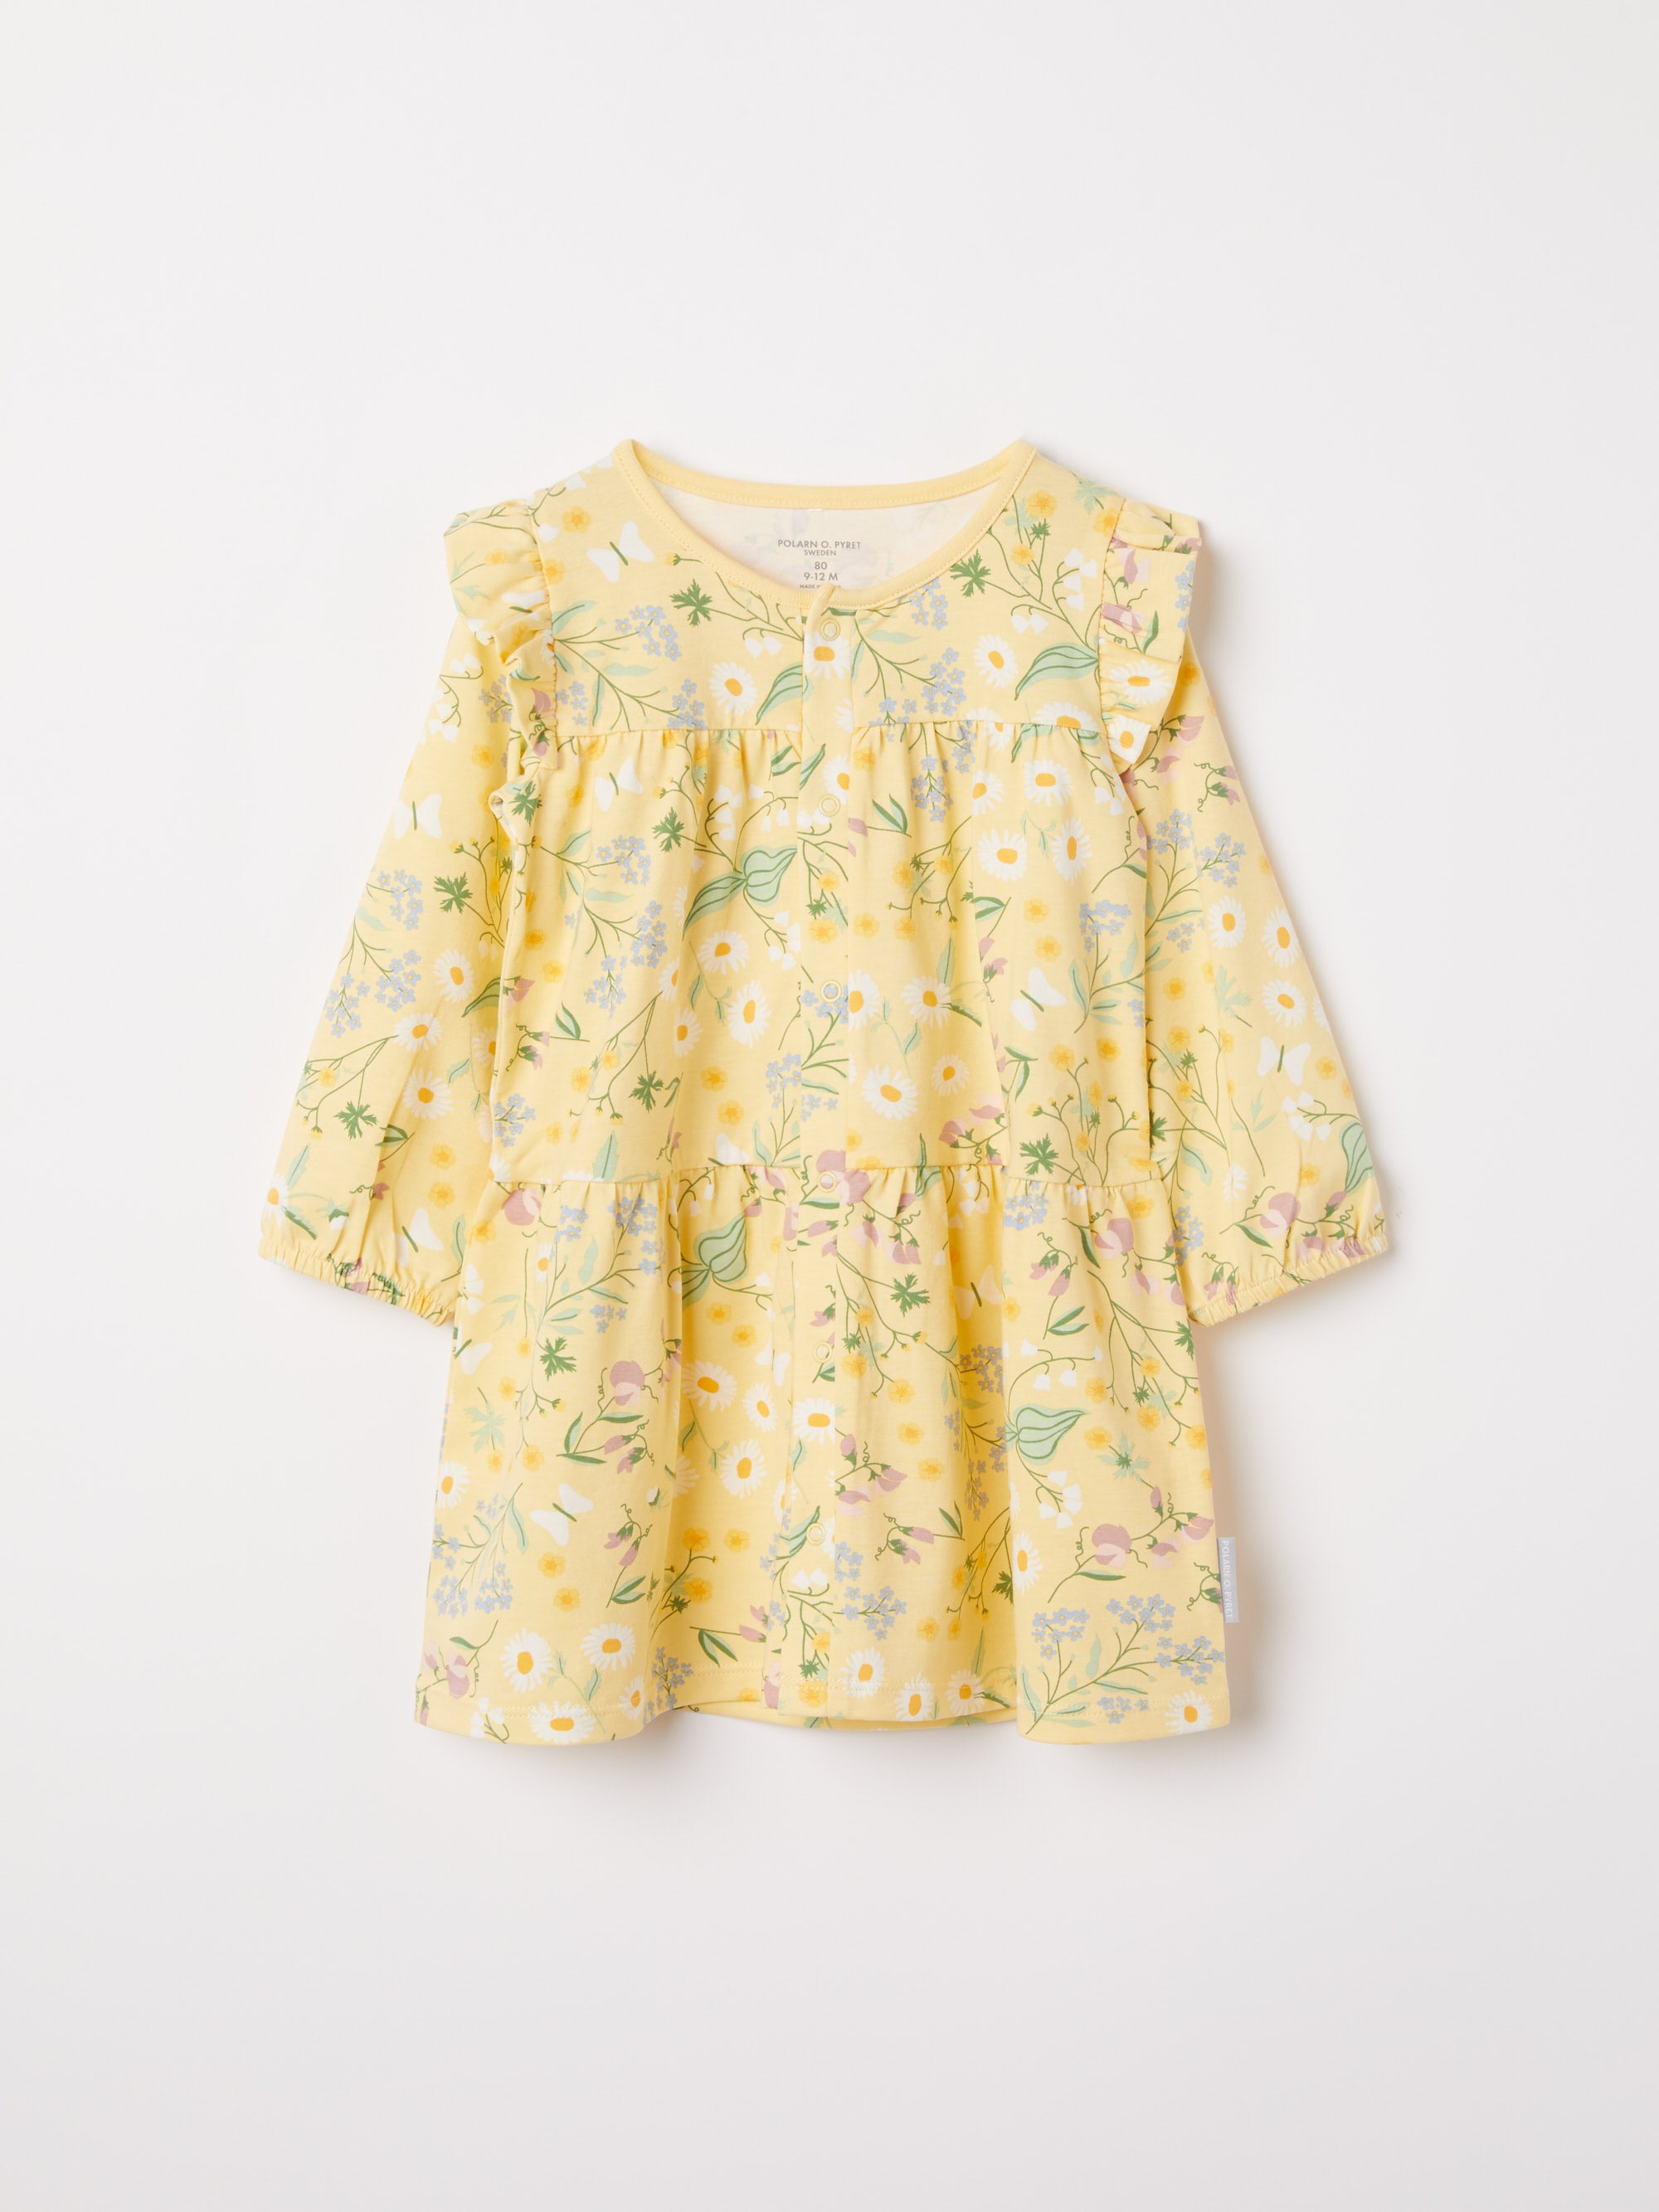 Ditsy Floral Baby Dress